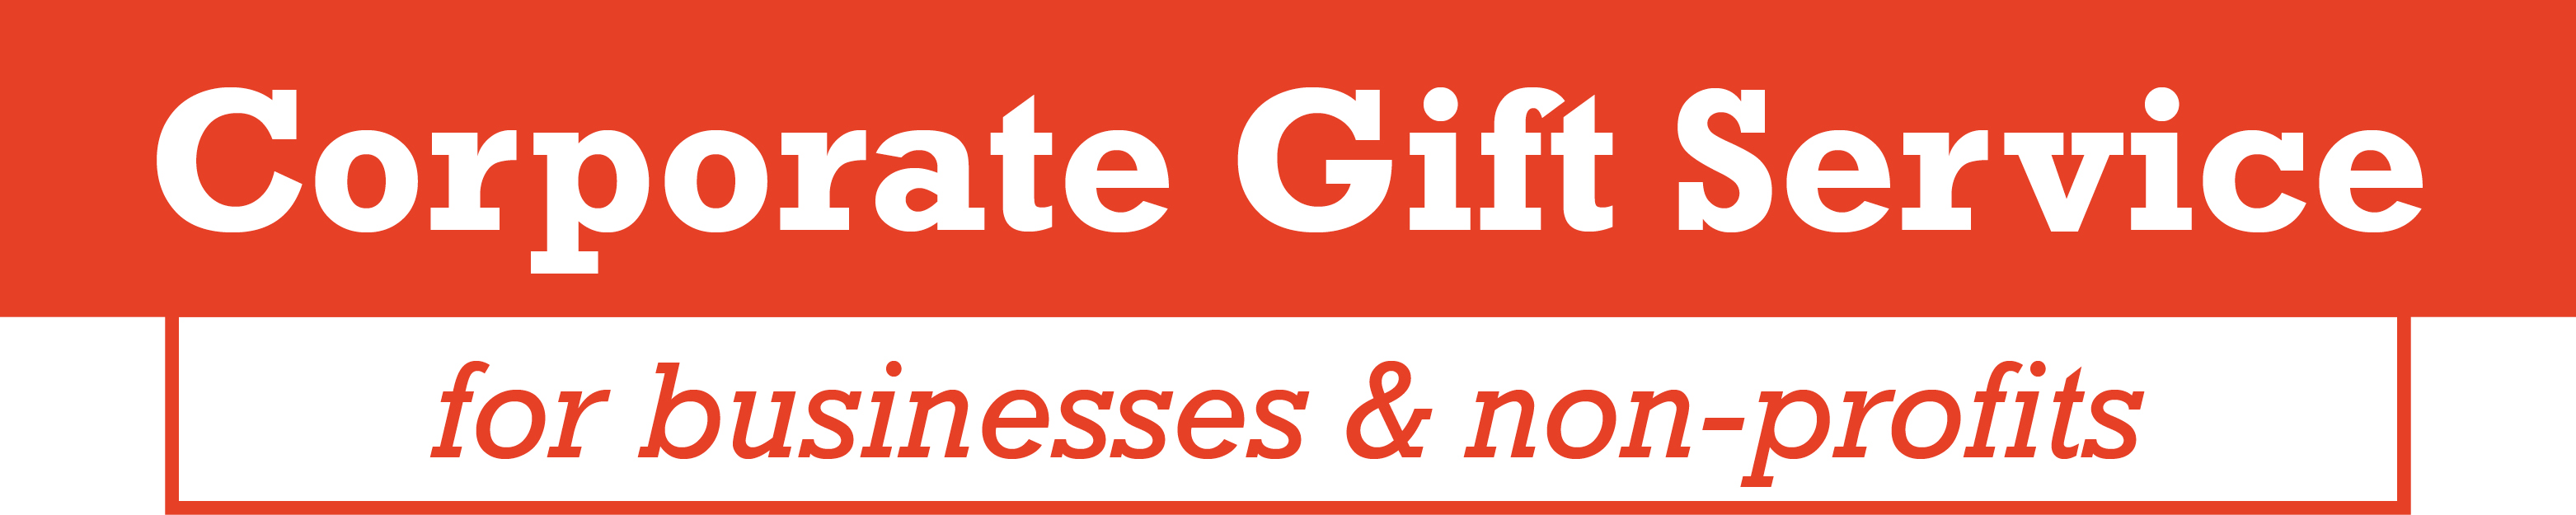 Corporate Gift Service for businesses and non-profits